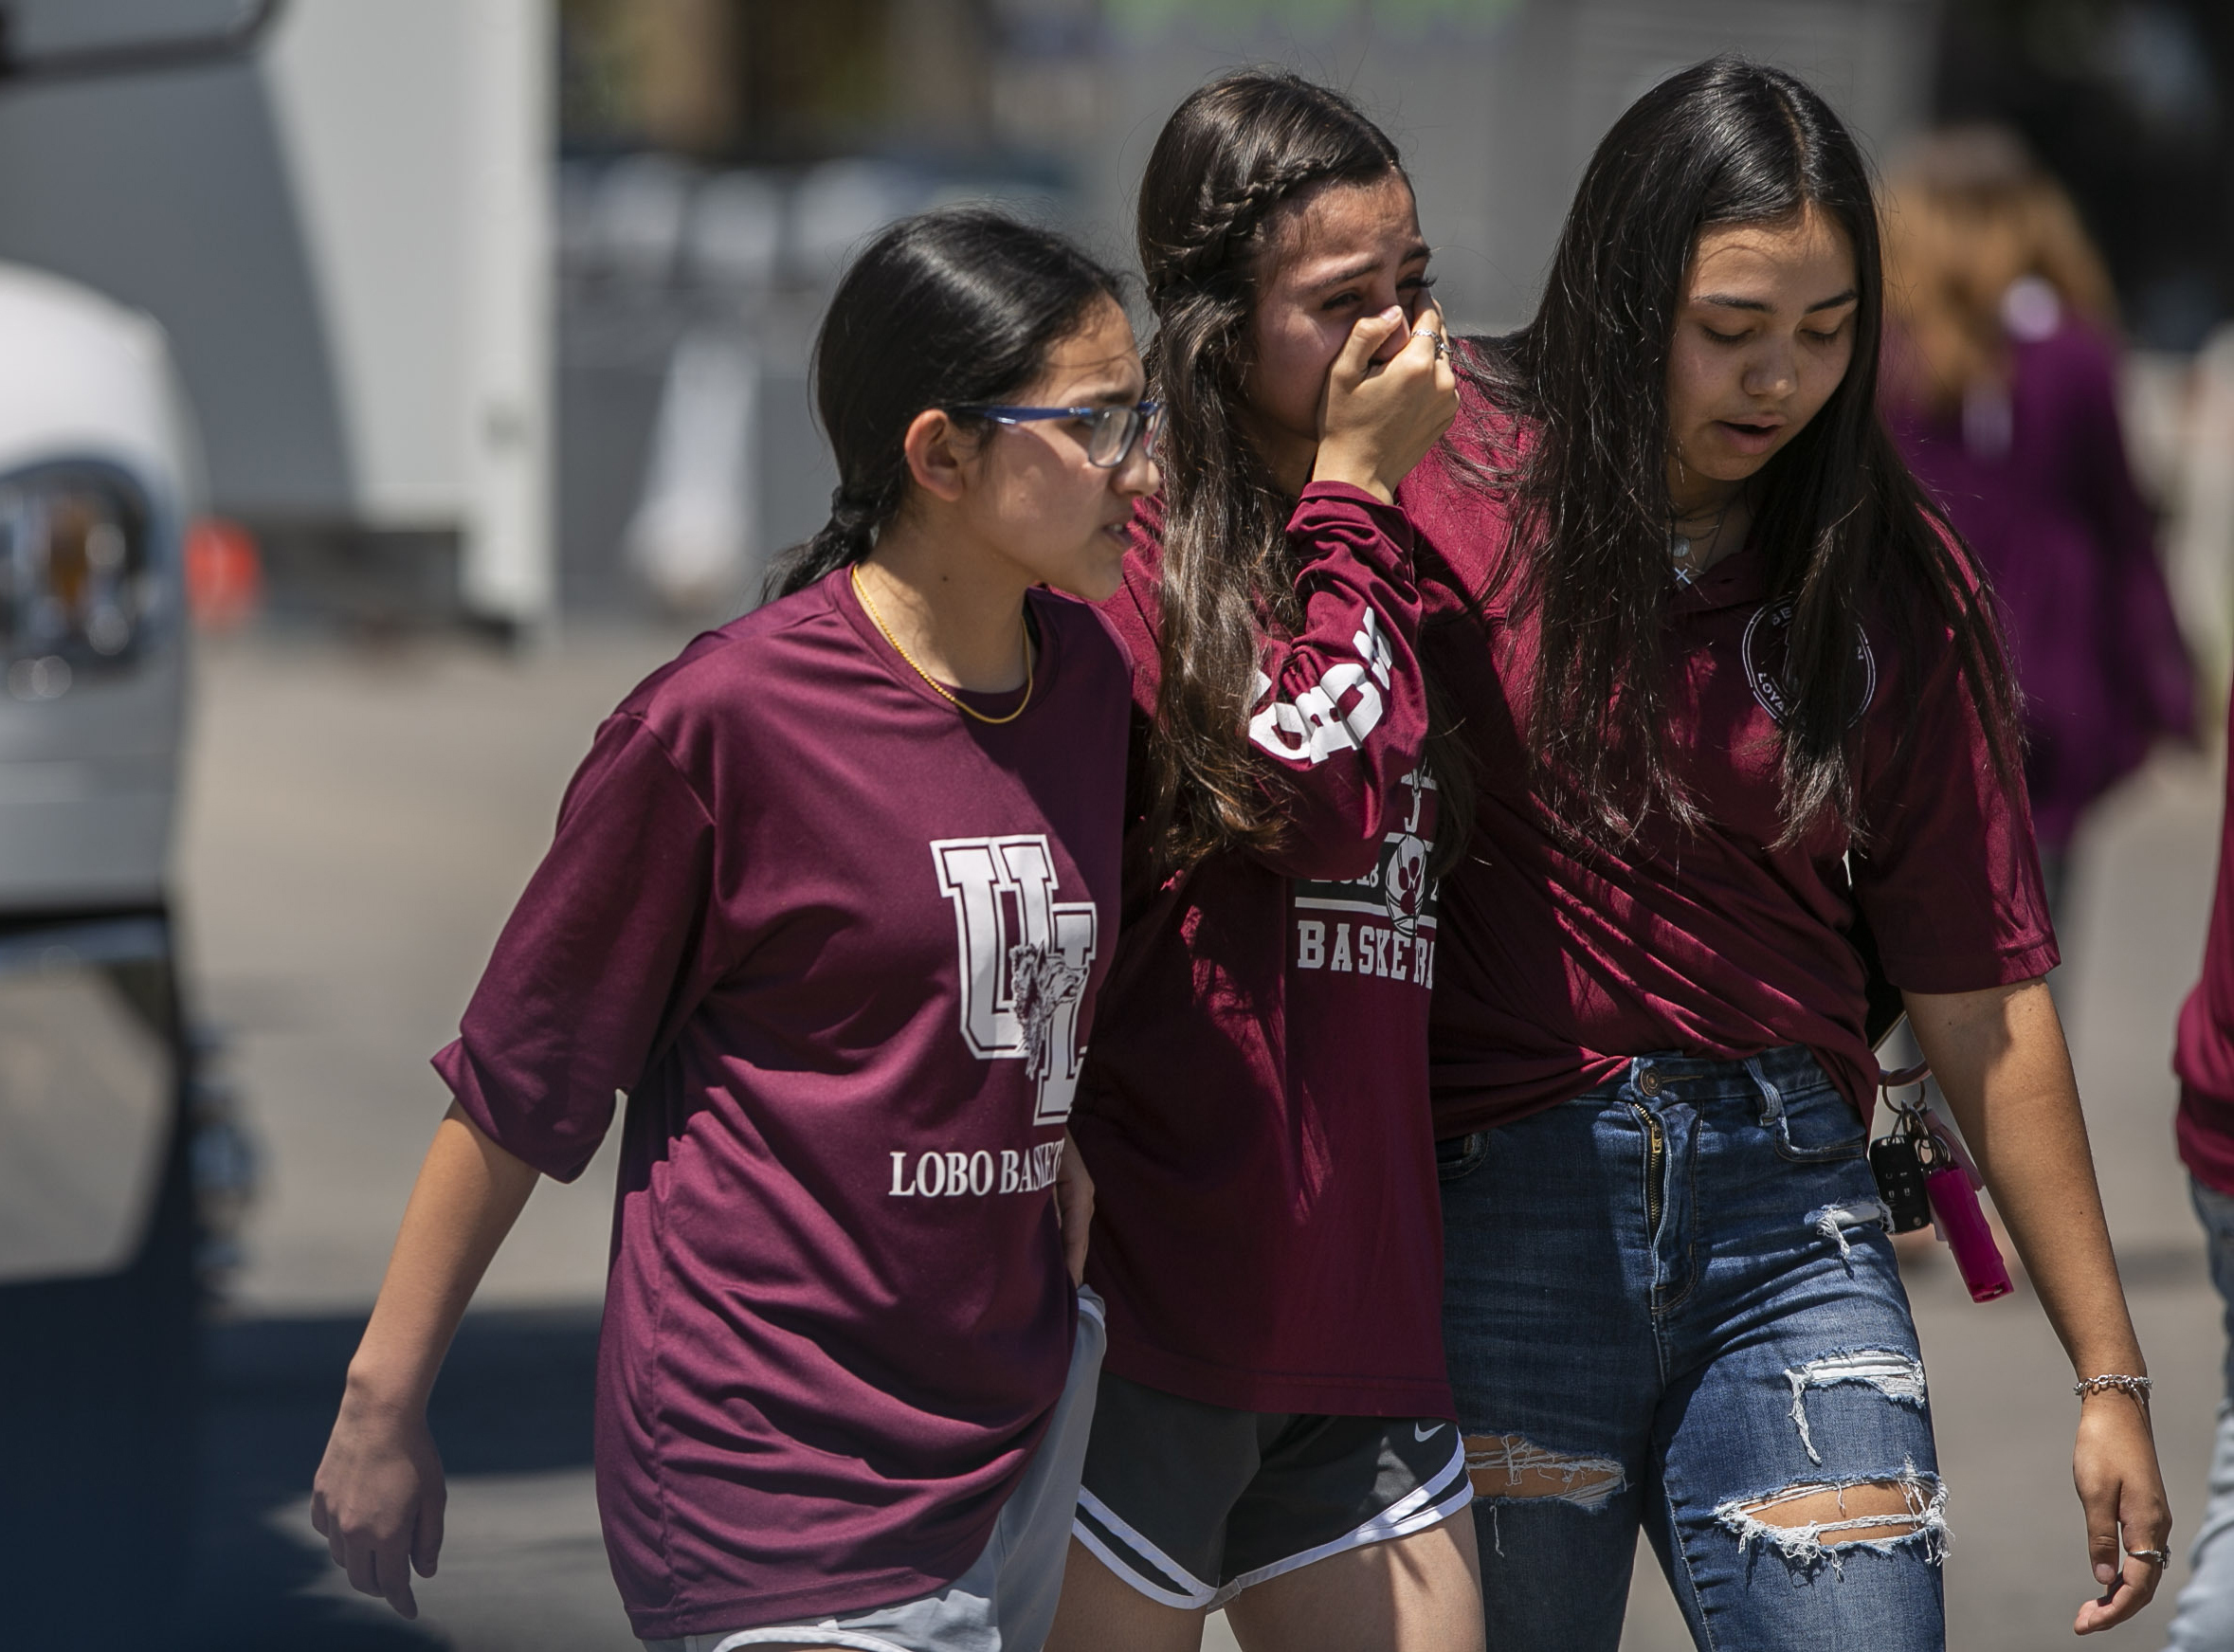 Overcome with emotion, young people comfort each other after leaving a memorial created outside Robb Elementary School in Uvalde, Texas, on Thursday